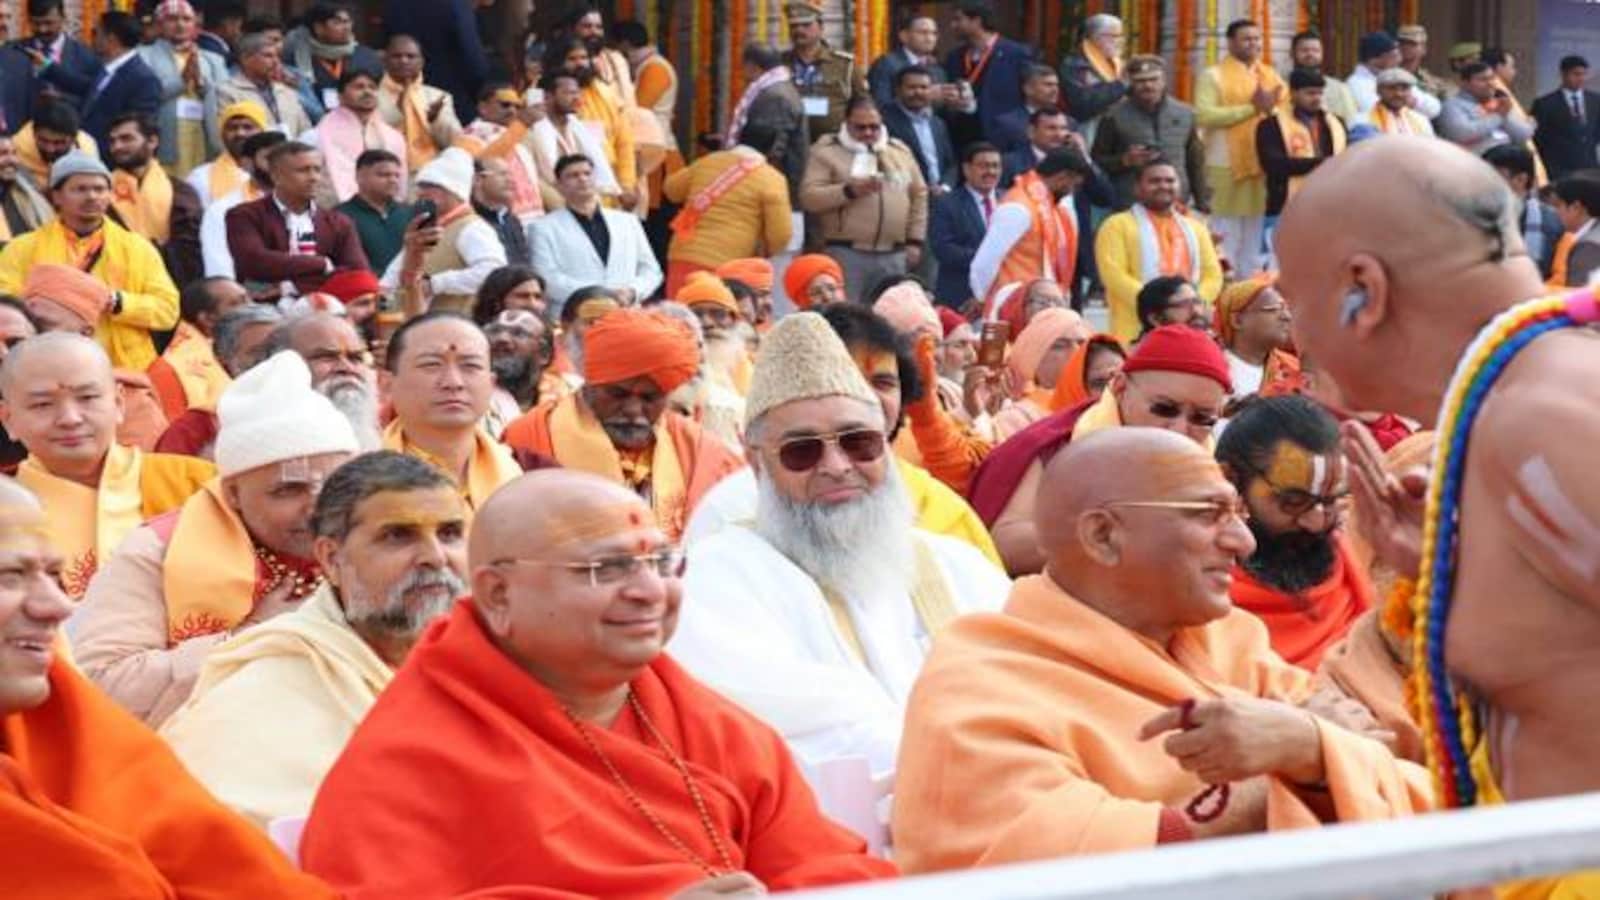 Ram Mandir inauguration: Views from the other side